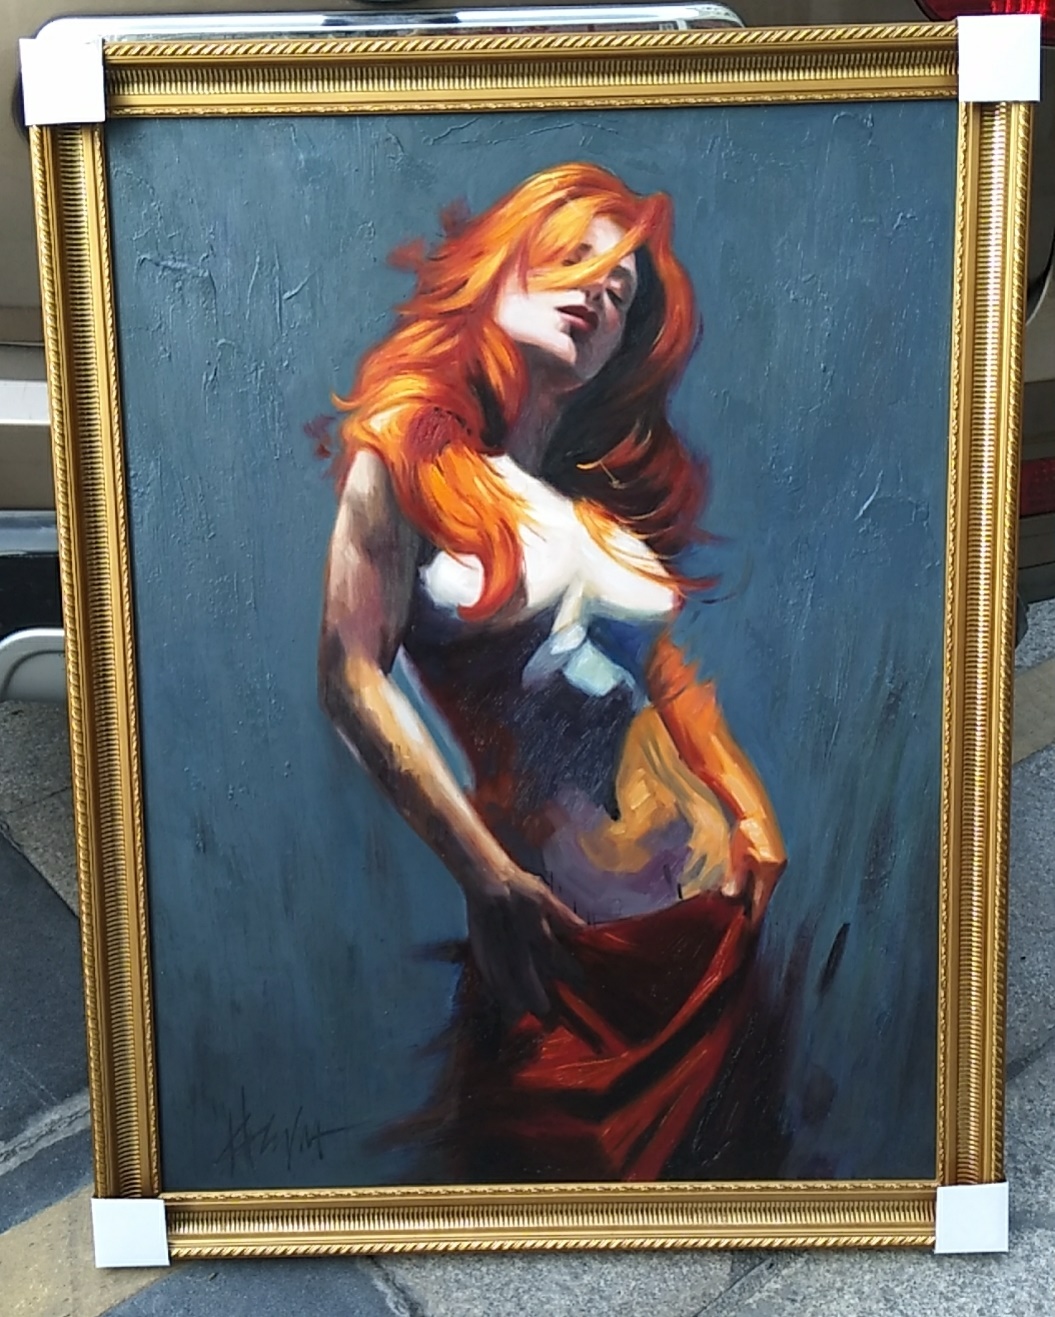 40" x 30" Framed oil painting Reproduction Henry Asencio fire